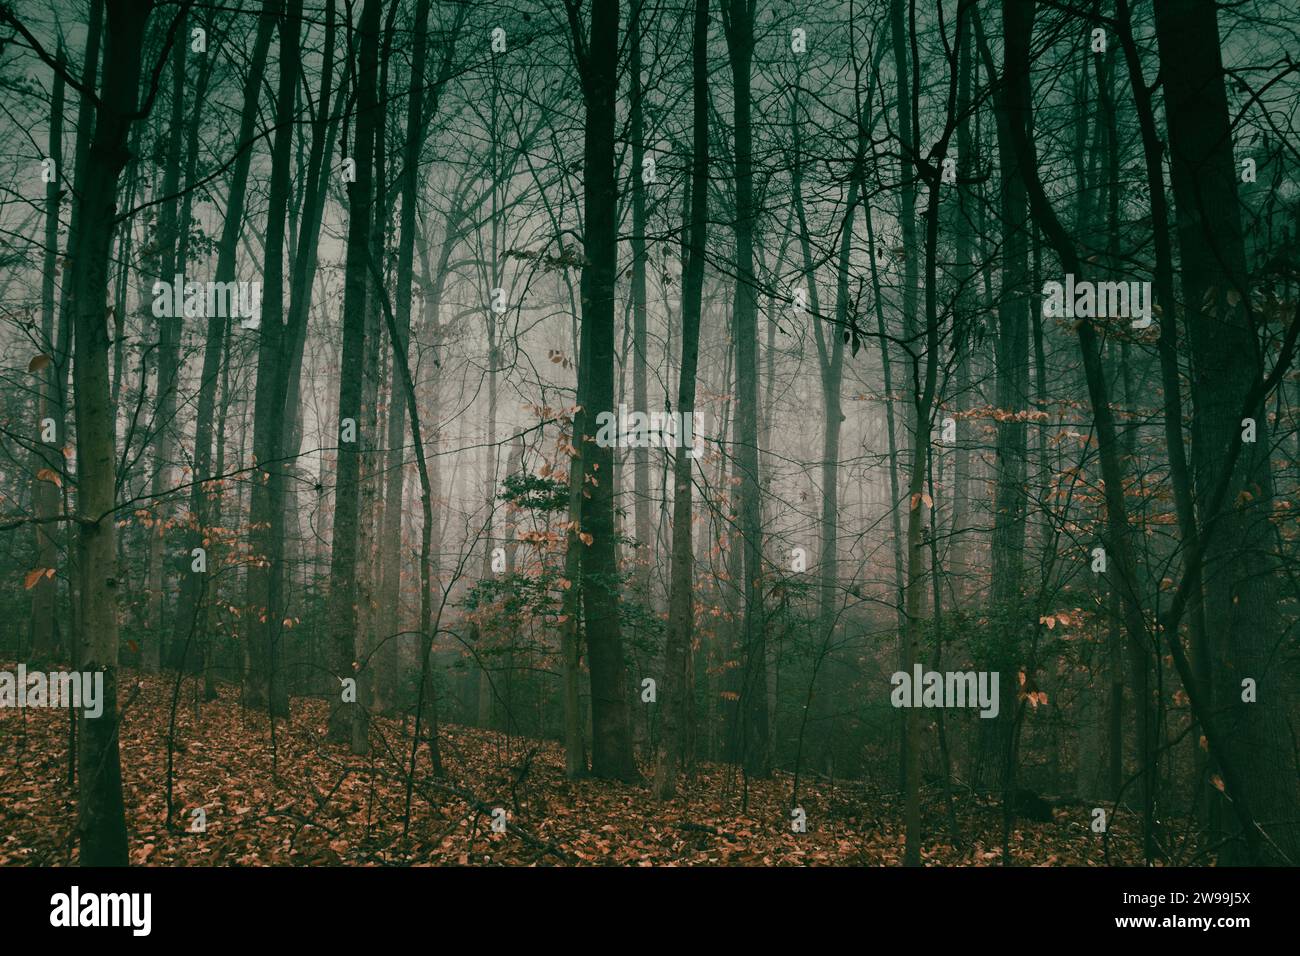 Winter forest on a foggy day, with fallen trees, bare branches, and a gloomy mood. Stock Photo